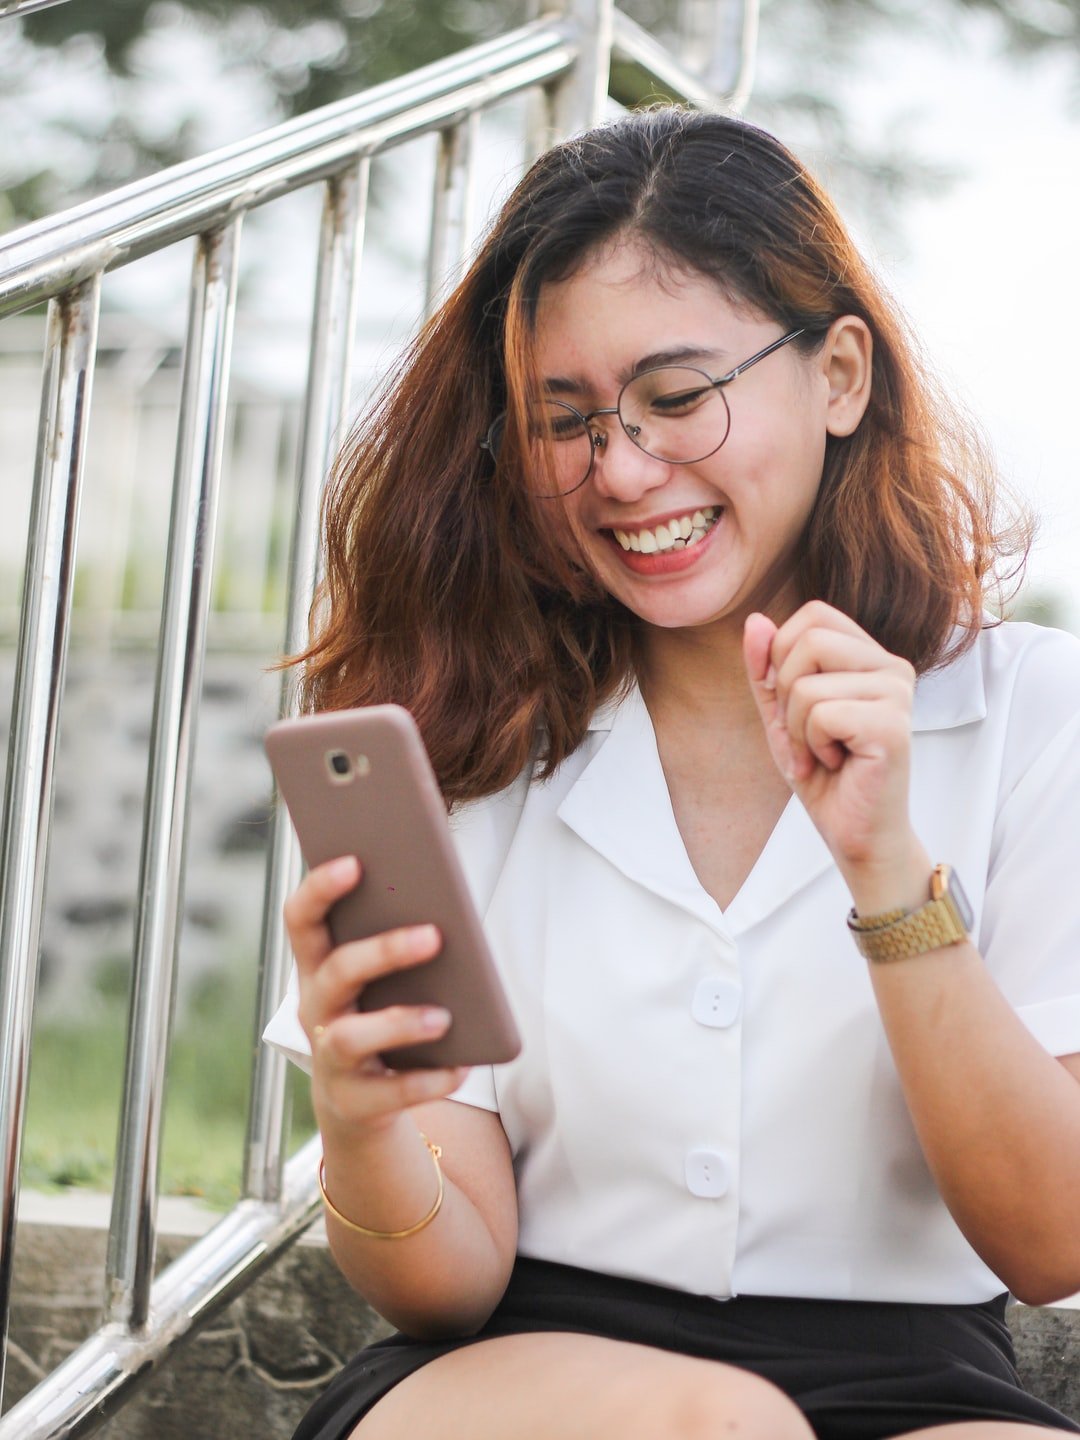 Young woman looking excitedly at her smartphone